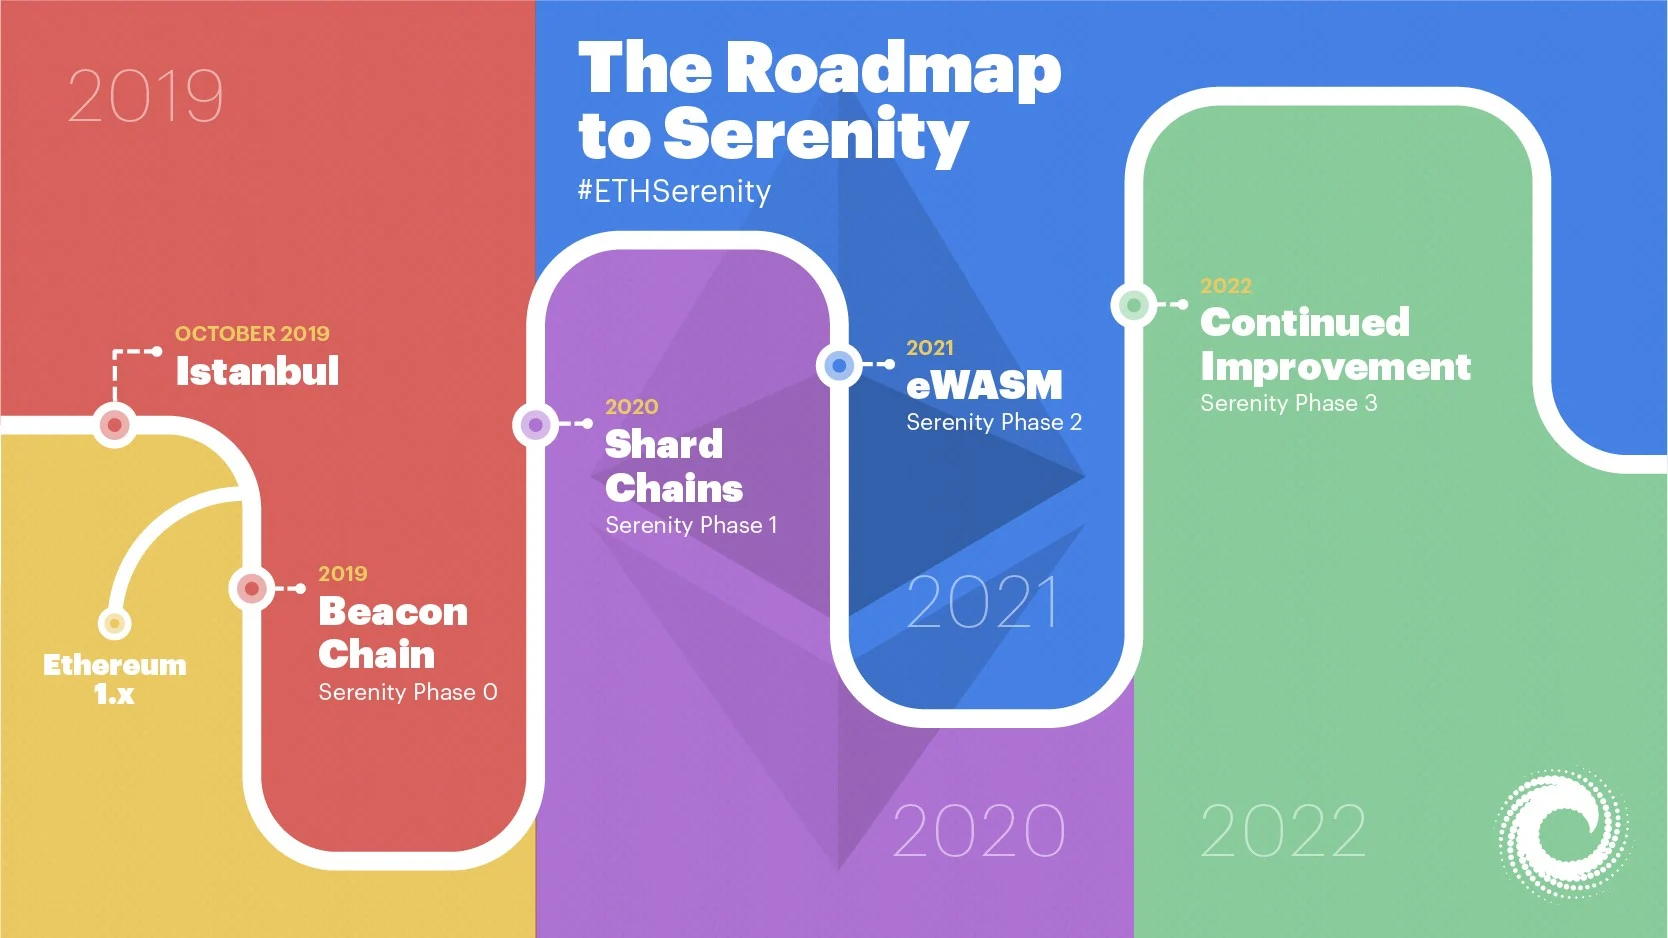 Image: The Roadmap to Serenity